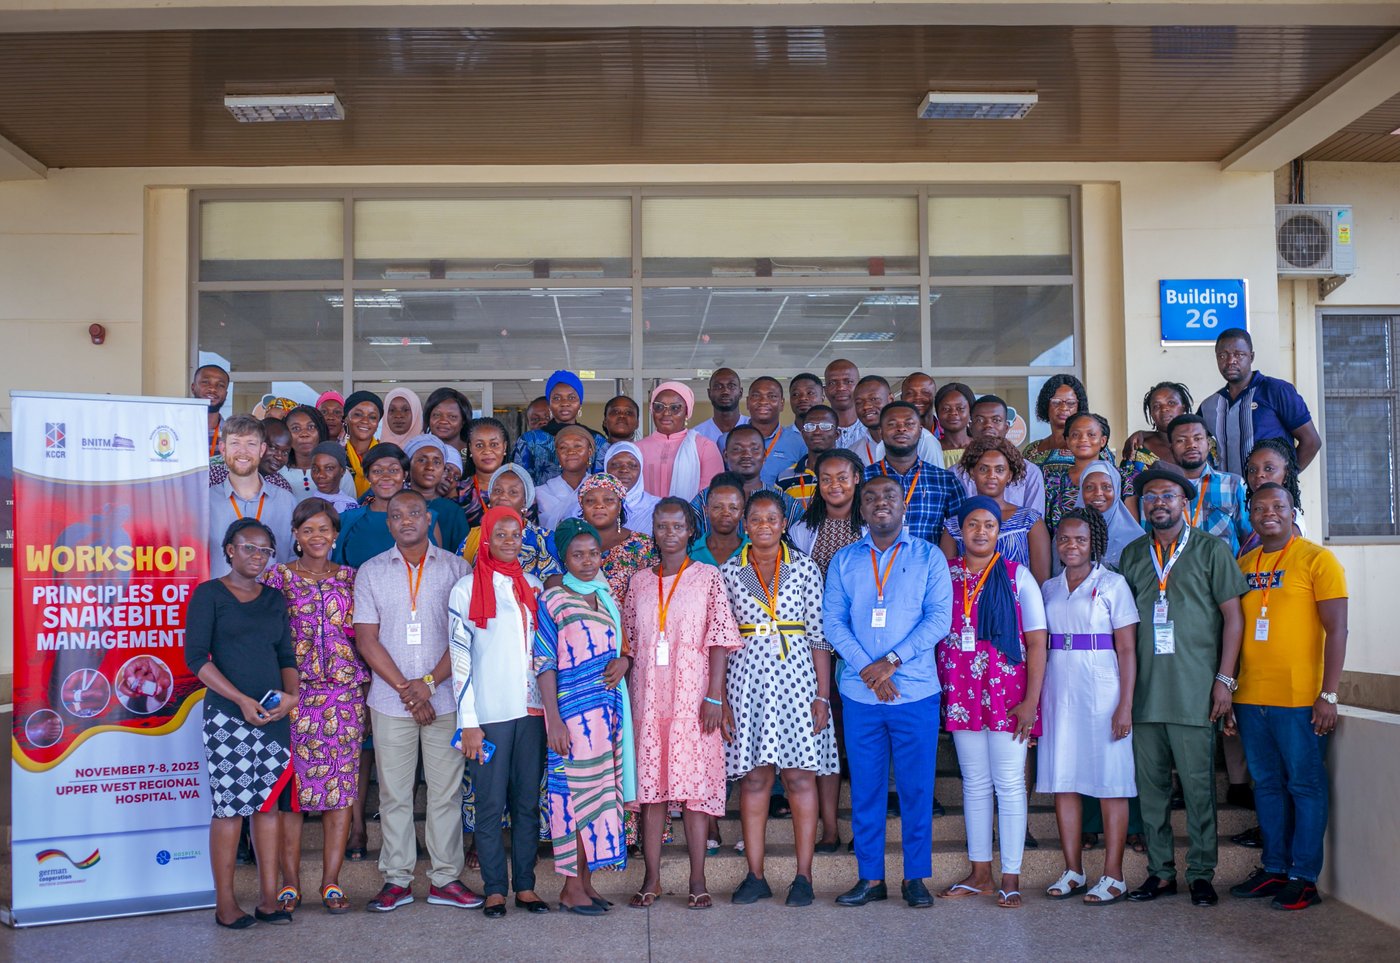 The picture shows a group of people standing in front of a hospital entrance next to a banner saying 'Workshop - Principles of Snakebite Management'. Everyone is looking friendly into the camera.